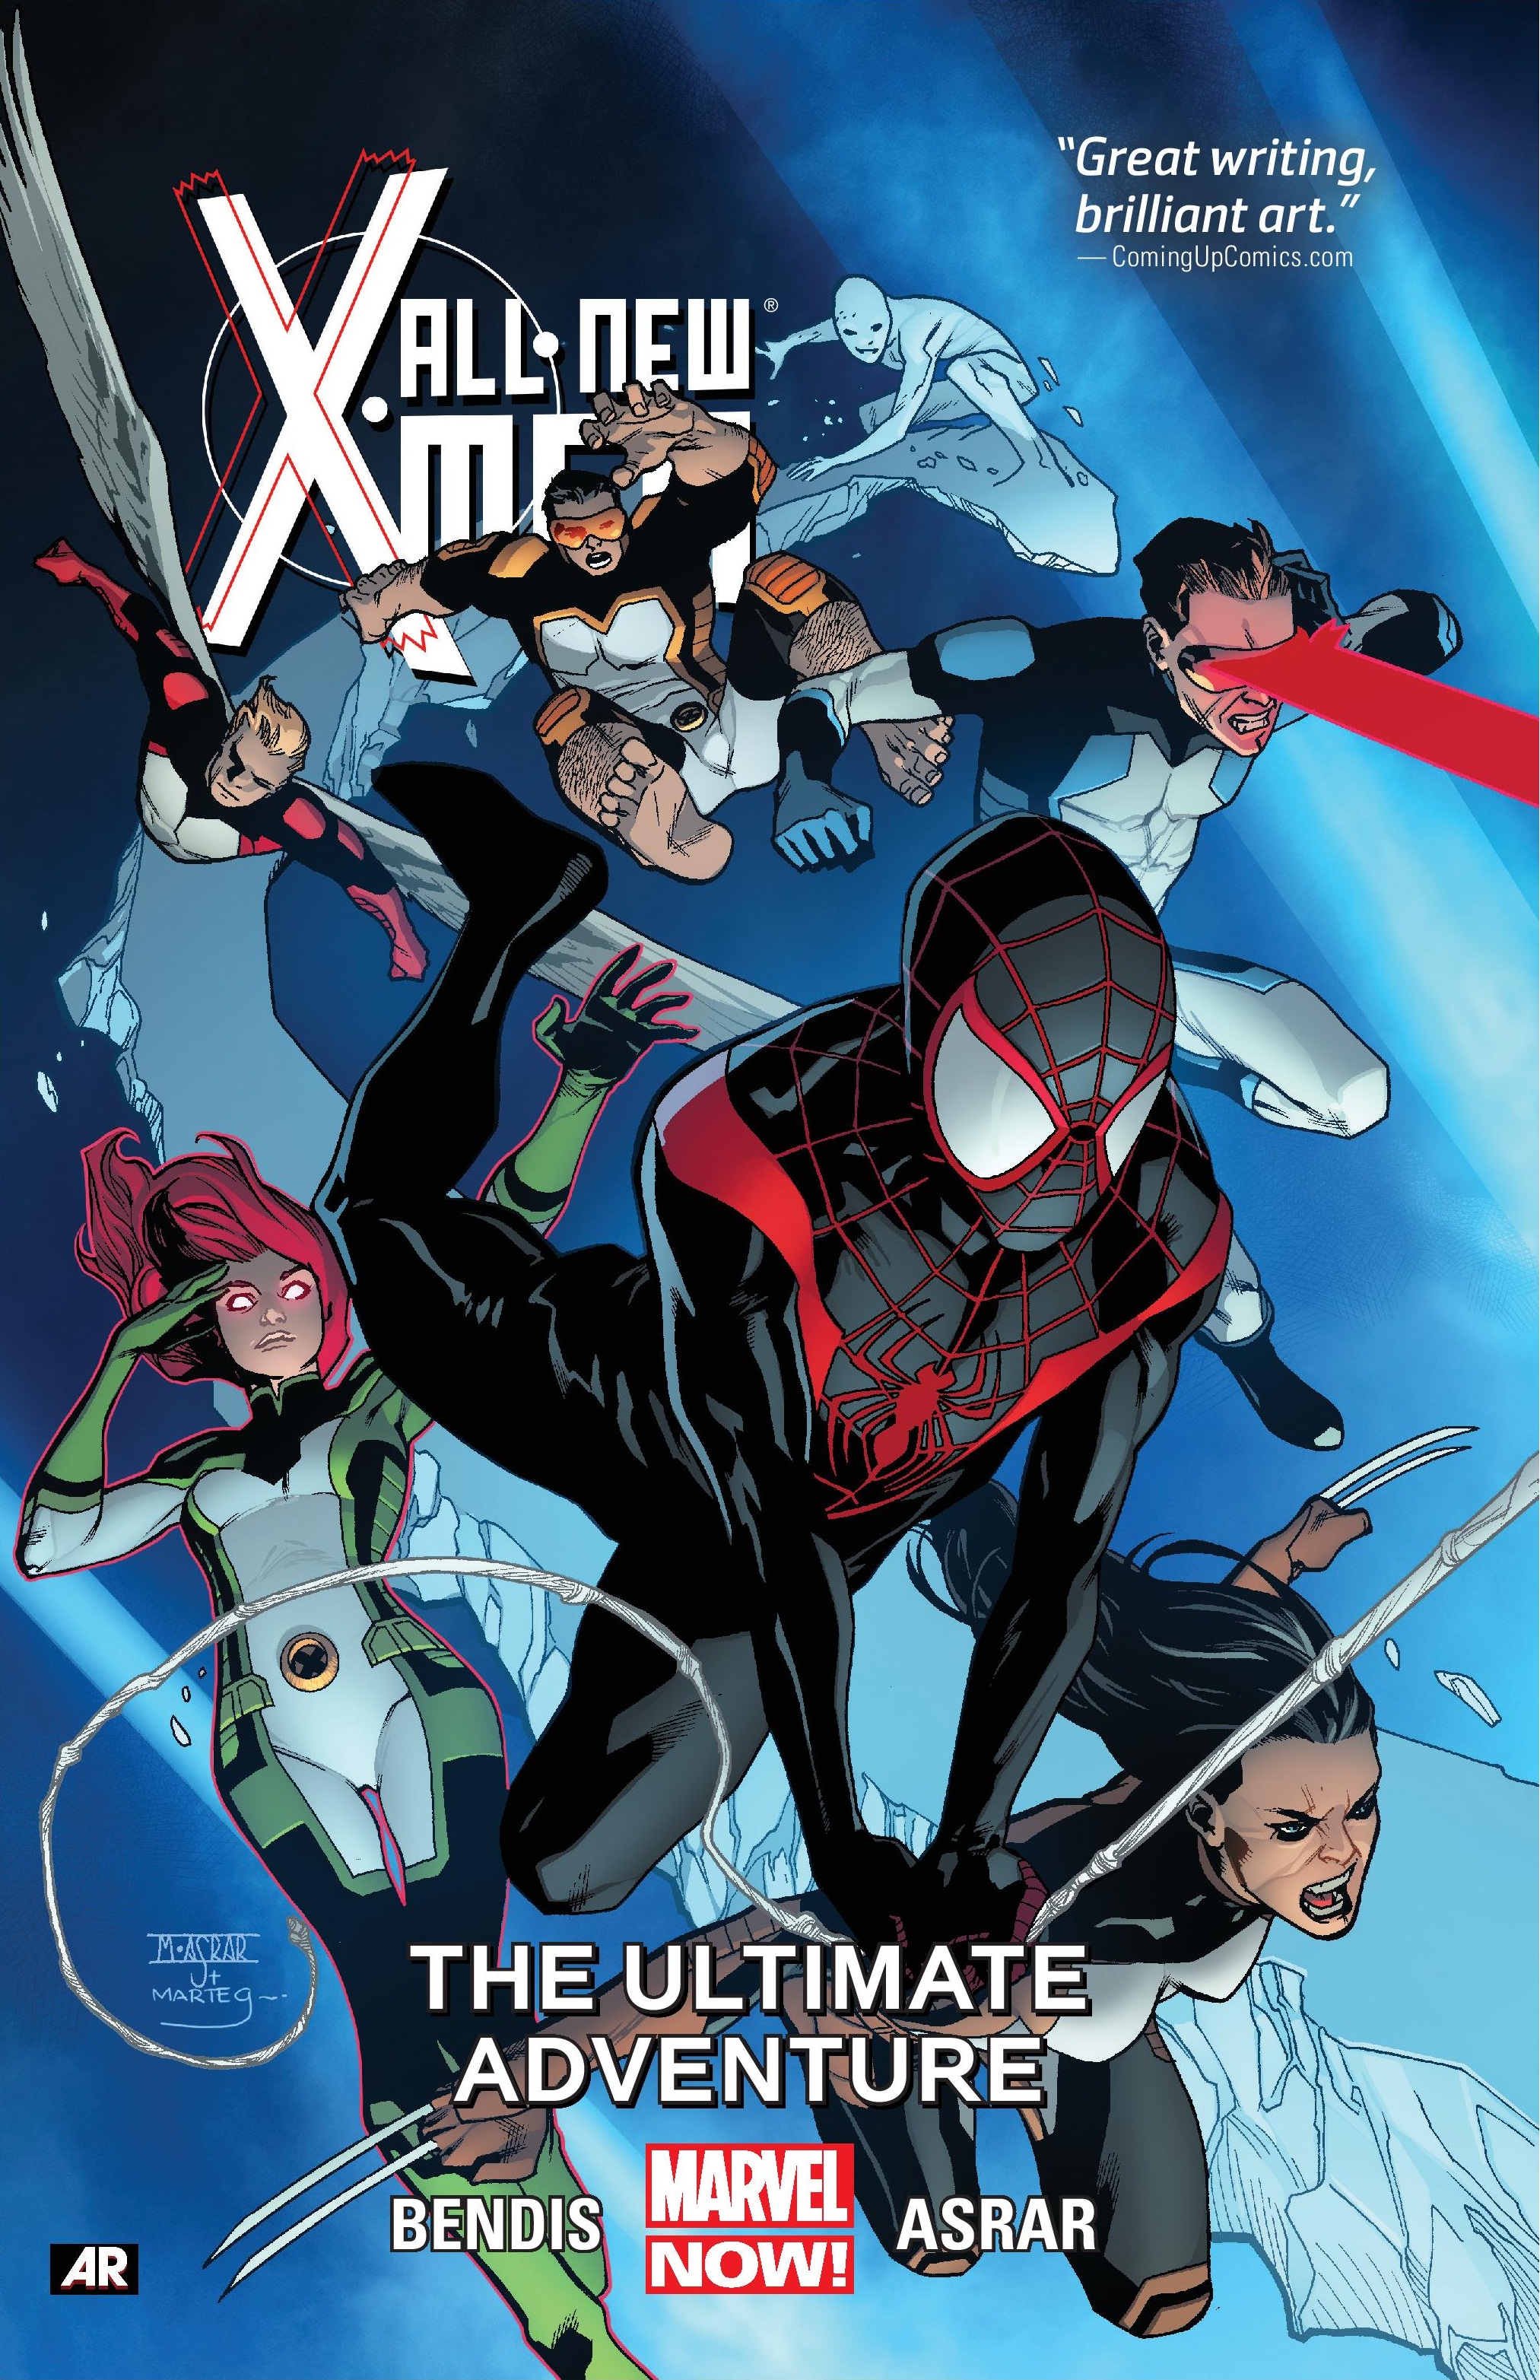 All-New X-Men Vol. 6: The Ultimate Adventure (Trade Paperback)